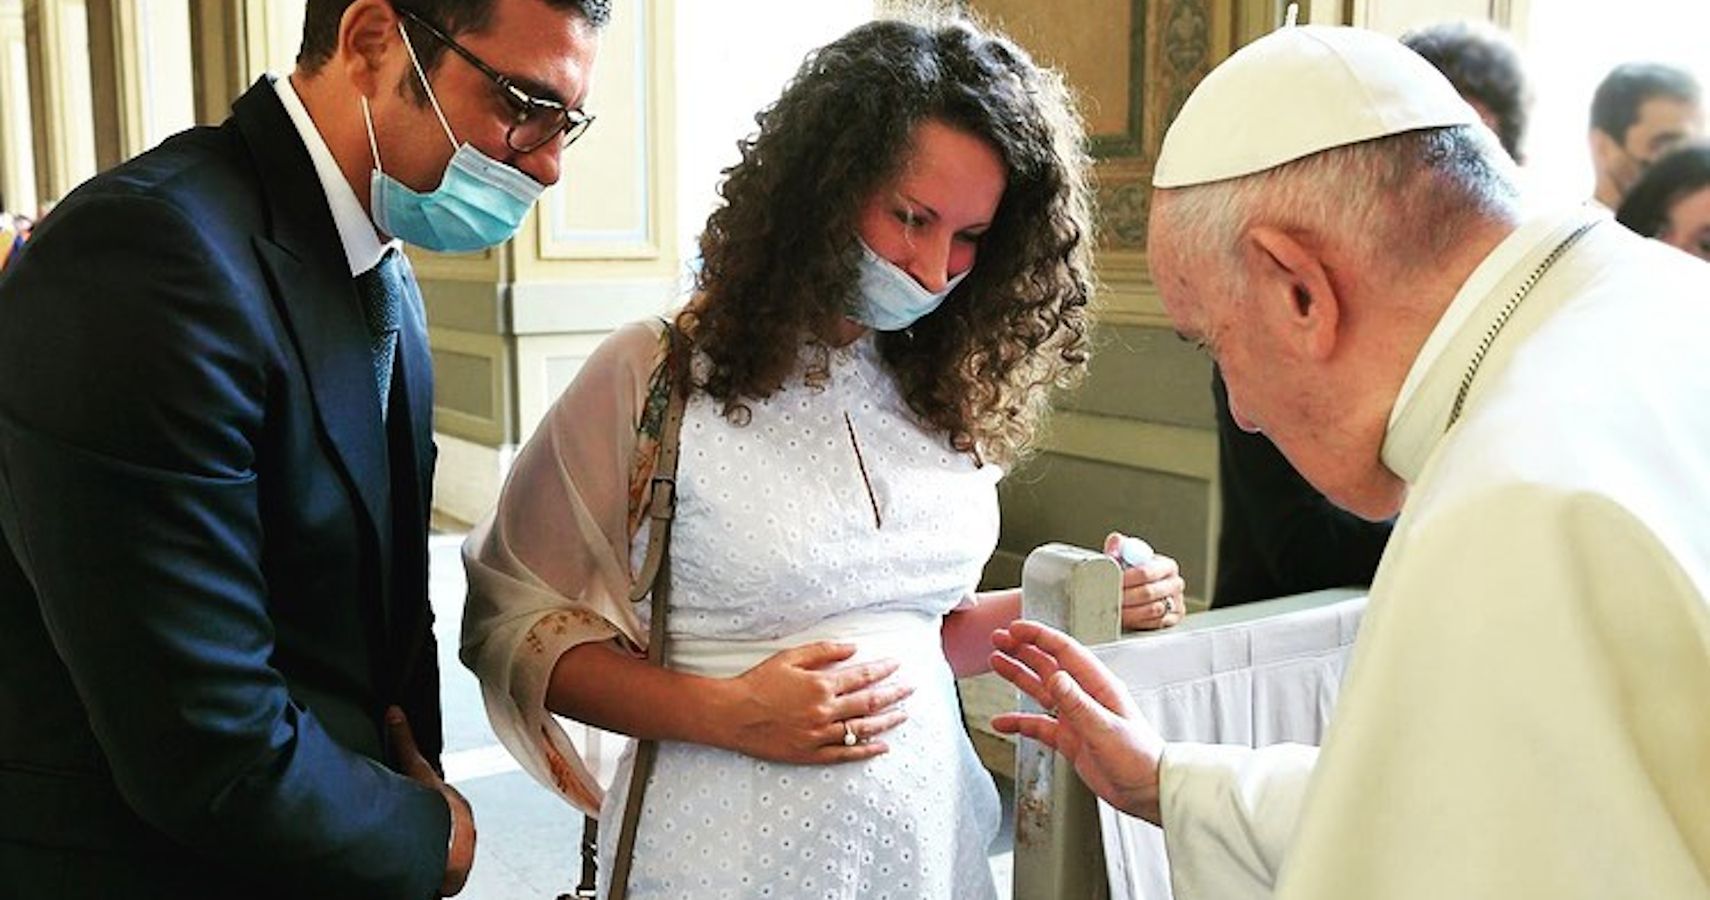 The Pope blessing a couple's unborn child